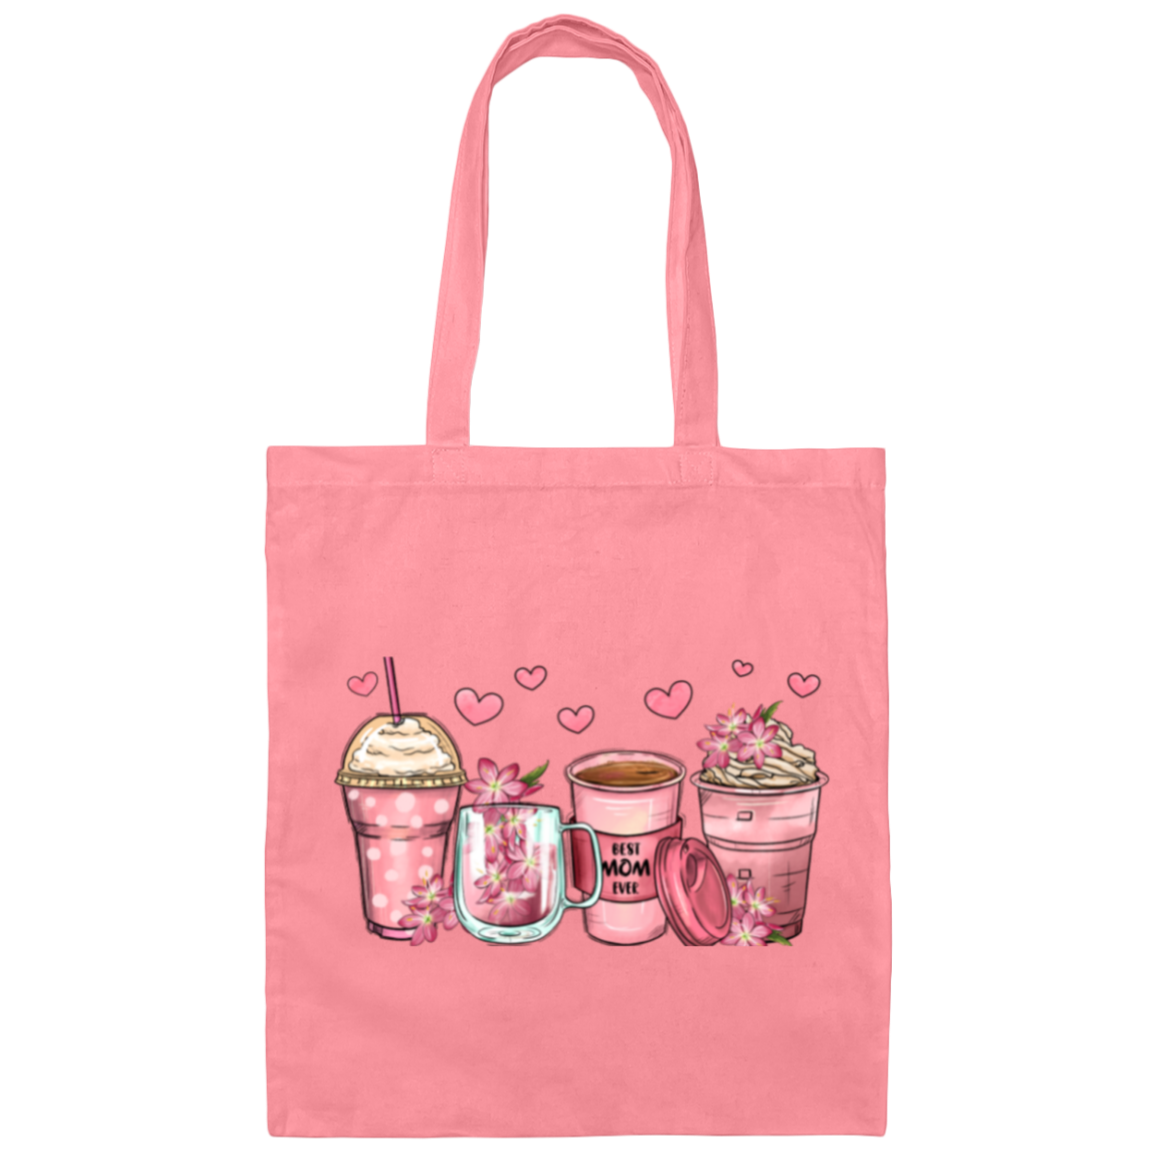 "Best Mom" Canvas Tote Bag